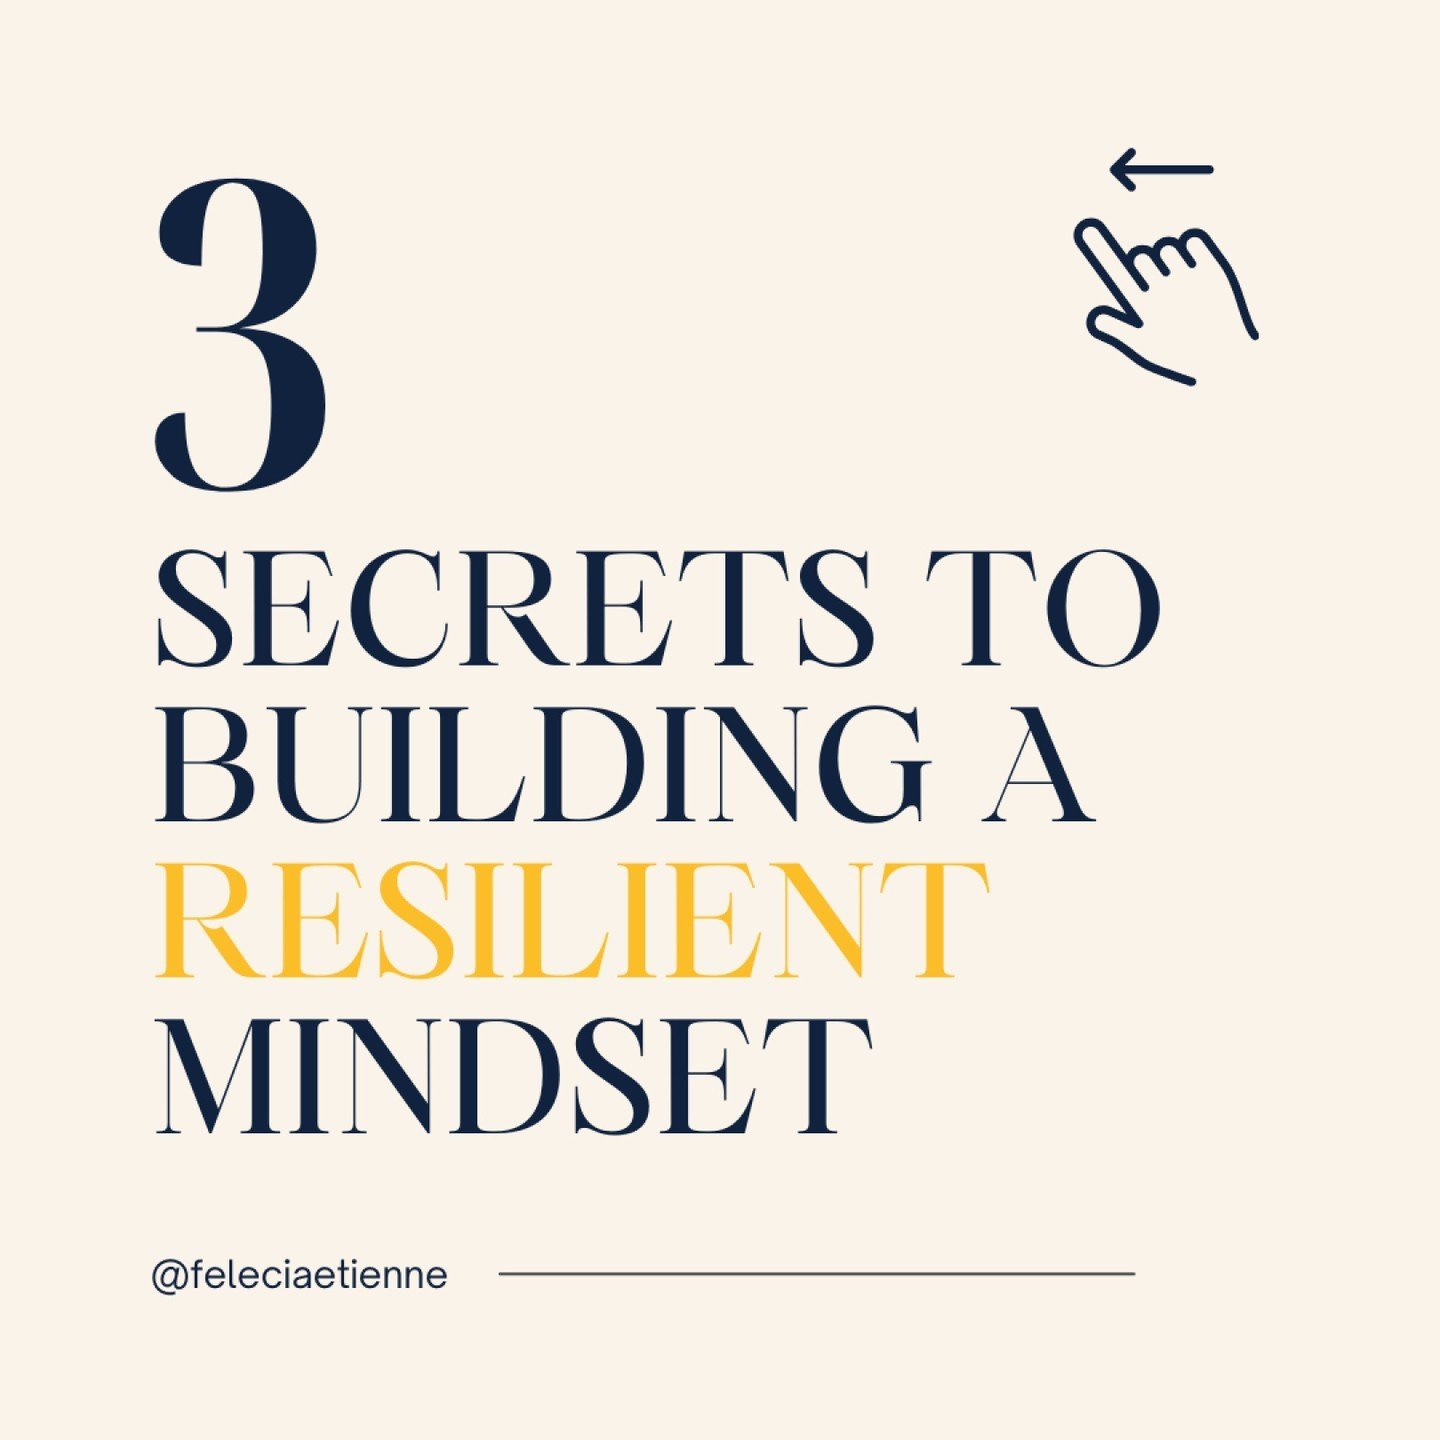 When life throws you curve balls, it's essential to have a resilient mind. 

👉 Here are three simple secrets to building a resilient mind. 

By following these tips, you'll be able to stay positive and keep moving forward even when things get tough.